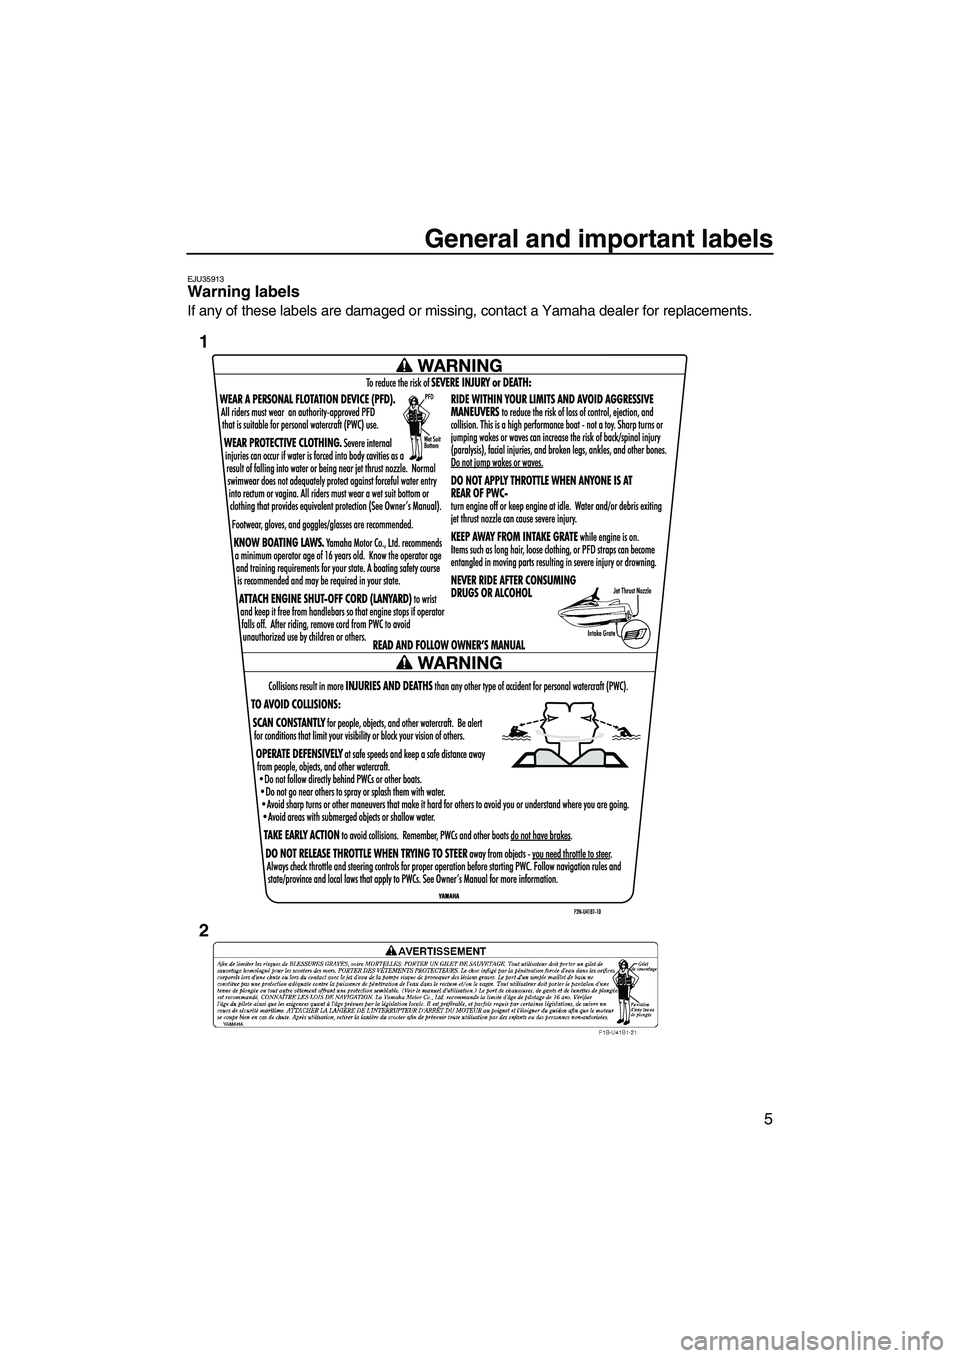 YAMAHA VXS 2012 User Guide General and important labels
5
EJU35913Warning labels 
If any of these labels are damaged or missing, contact a Yamaha dealer for replacements.
1
2
UF2M71E0.book  Page 5  Wednesday, June 29, 2011  9:2